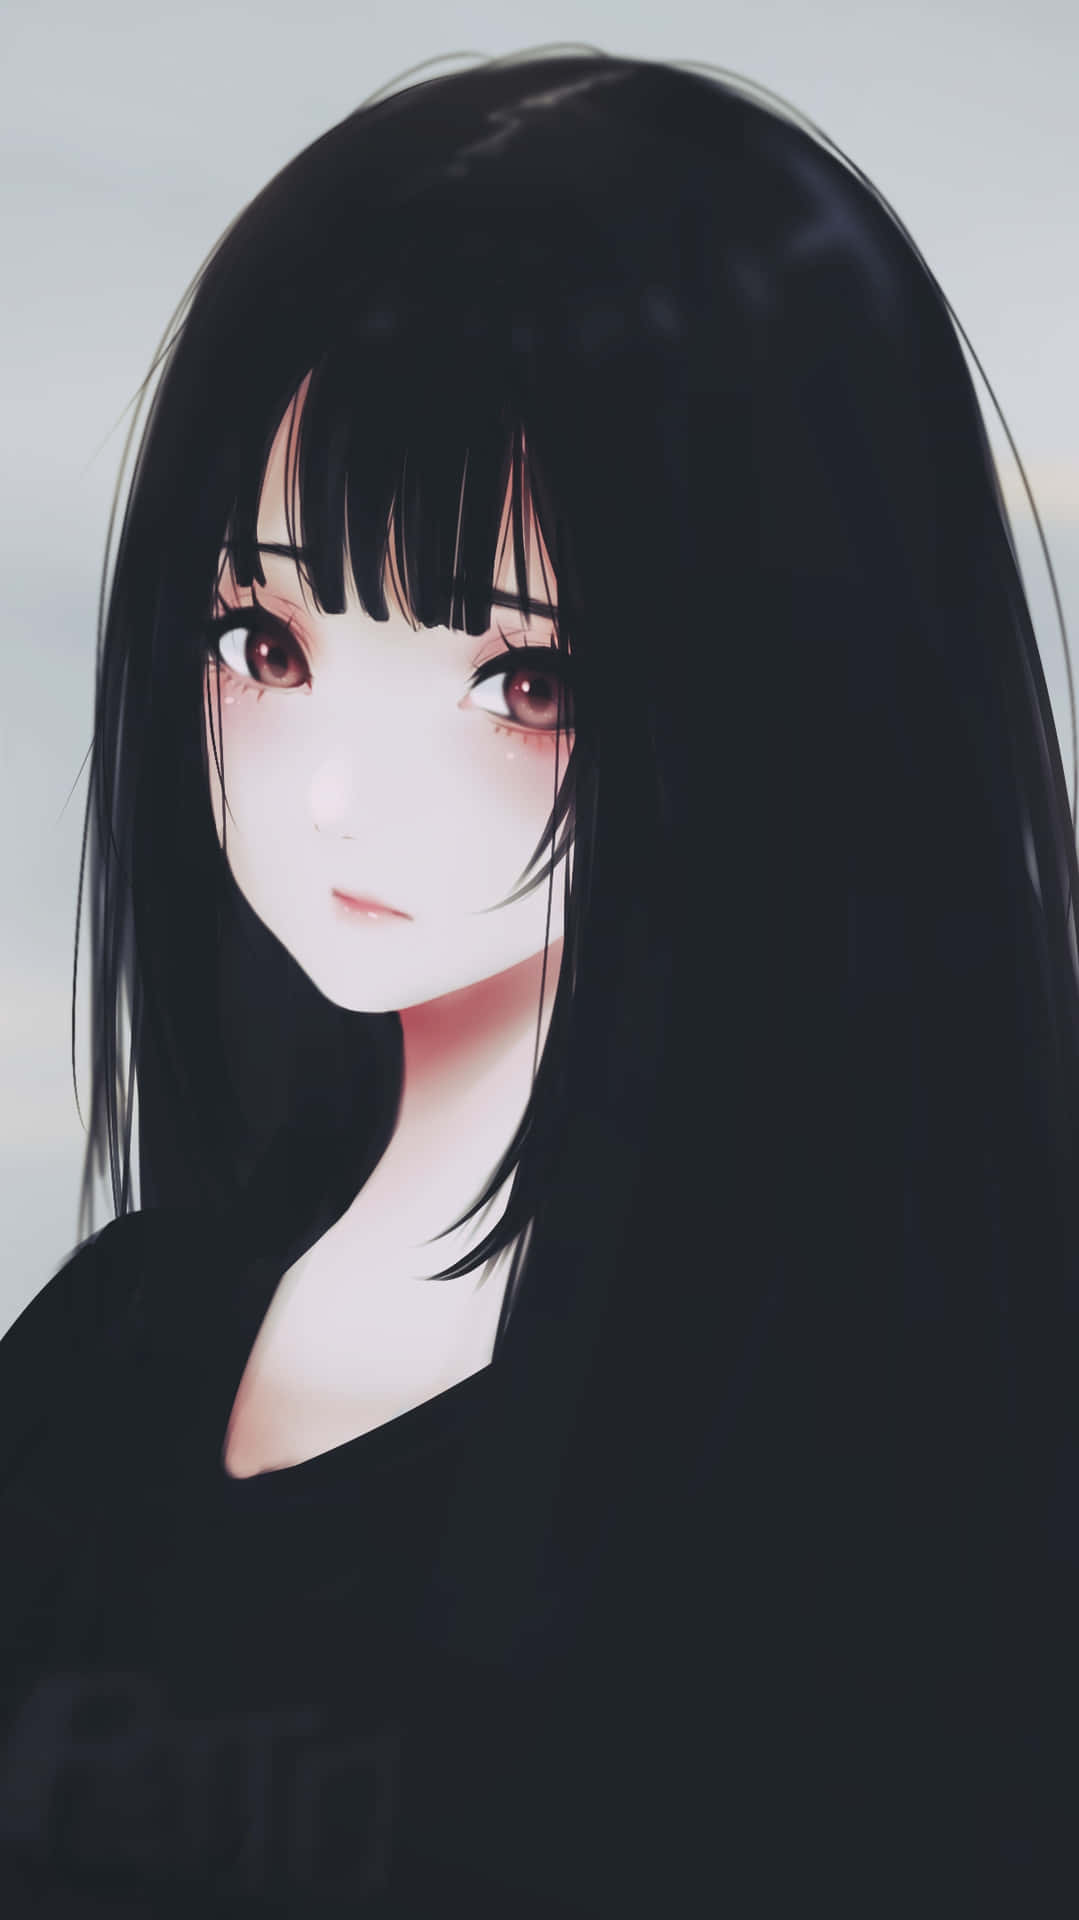 A Black Haired Girl With A Smile Wallpaper